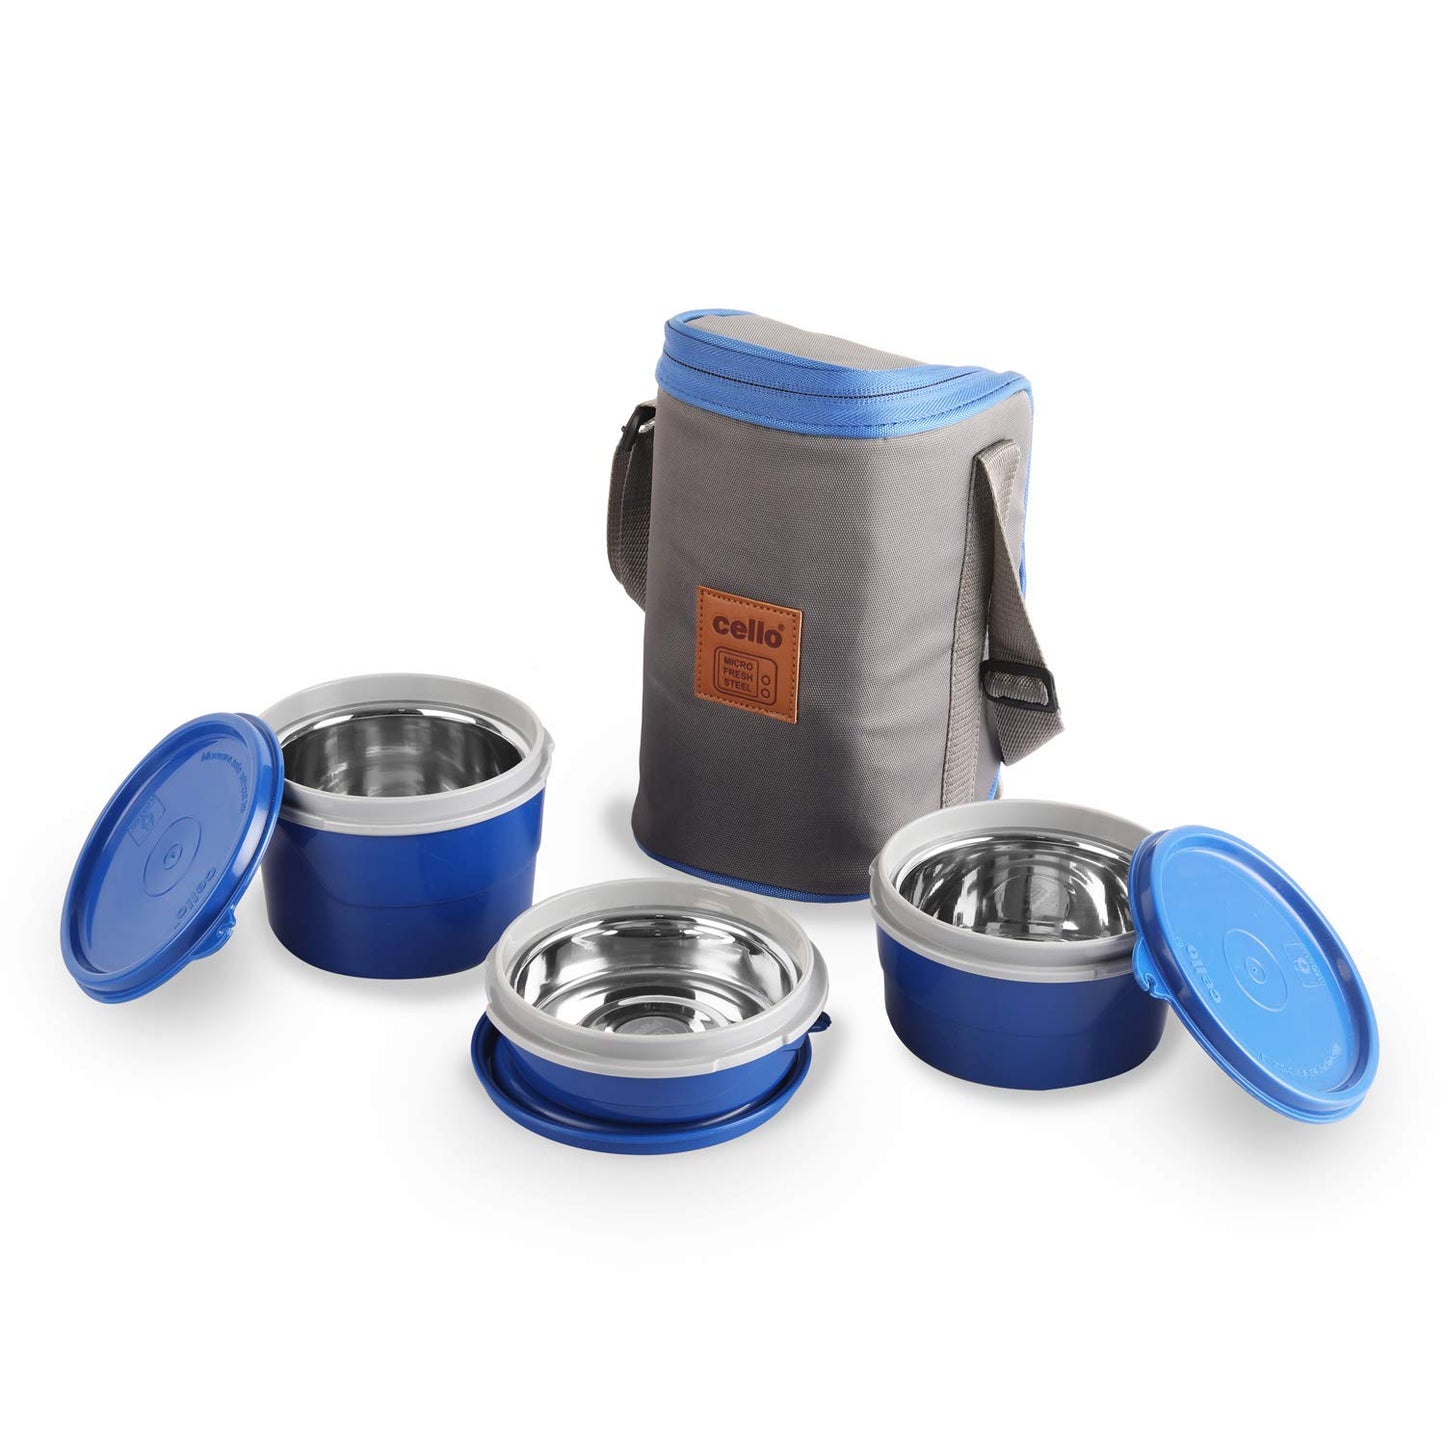 CELLO Maxfresh Hot Wave Stainless Steel 3 Container Lunch Box 225ml, 375ml and 550ml Grey